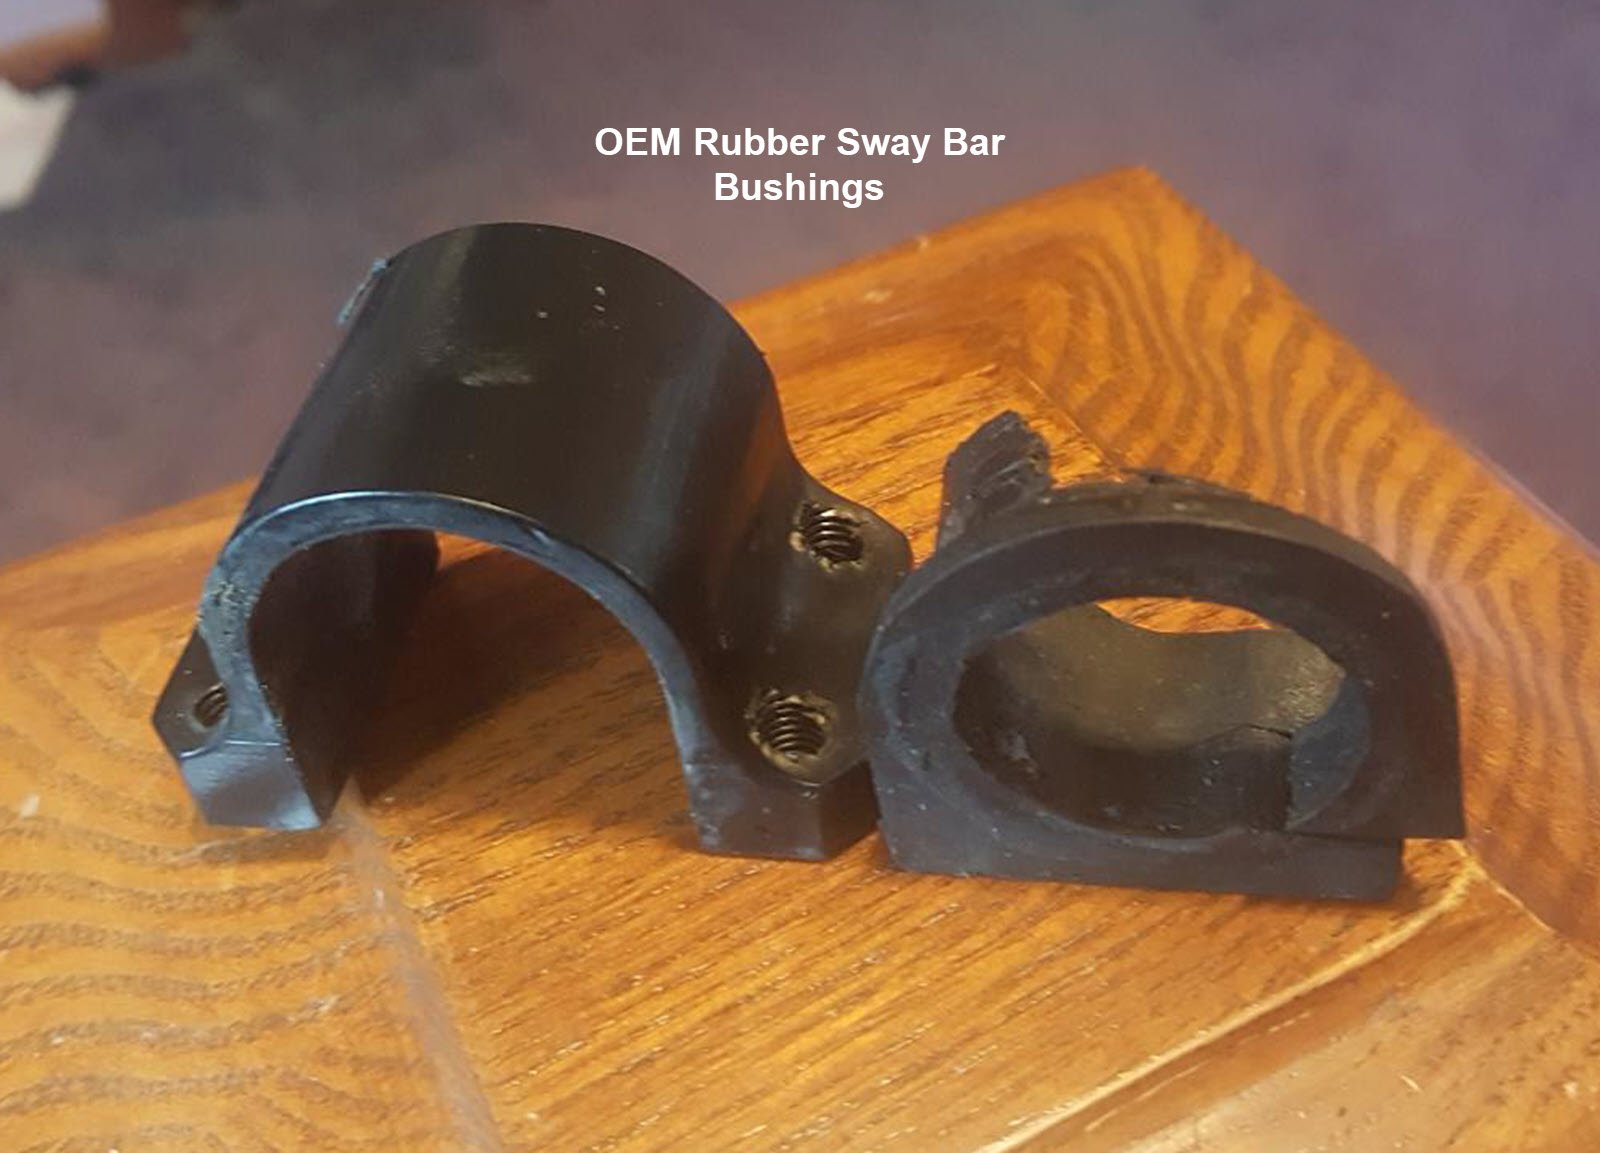 Rear Turbo Water Pipe — Raiden Performance - Luxury Car Parts and Services  - Jacksonville, FL